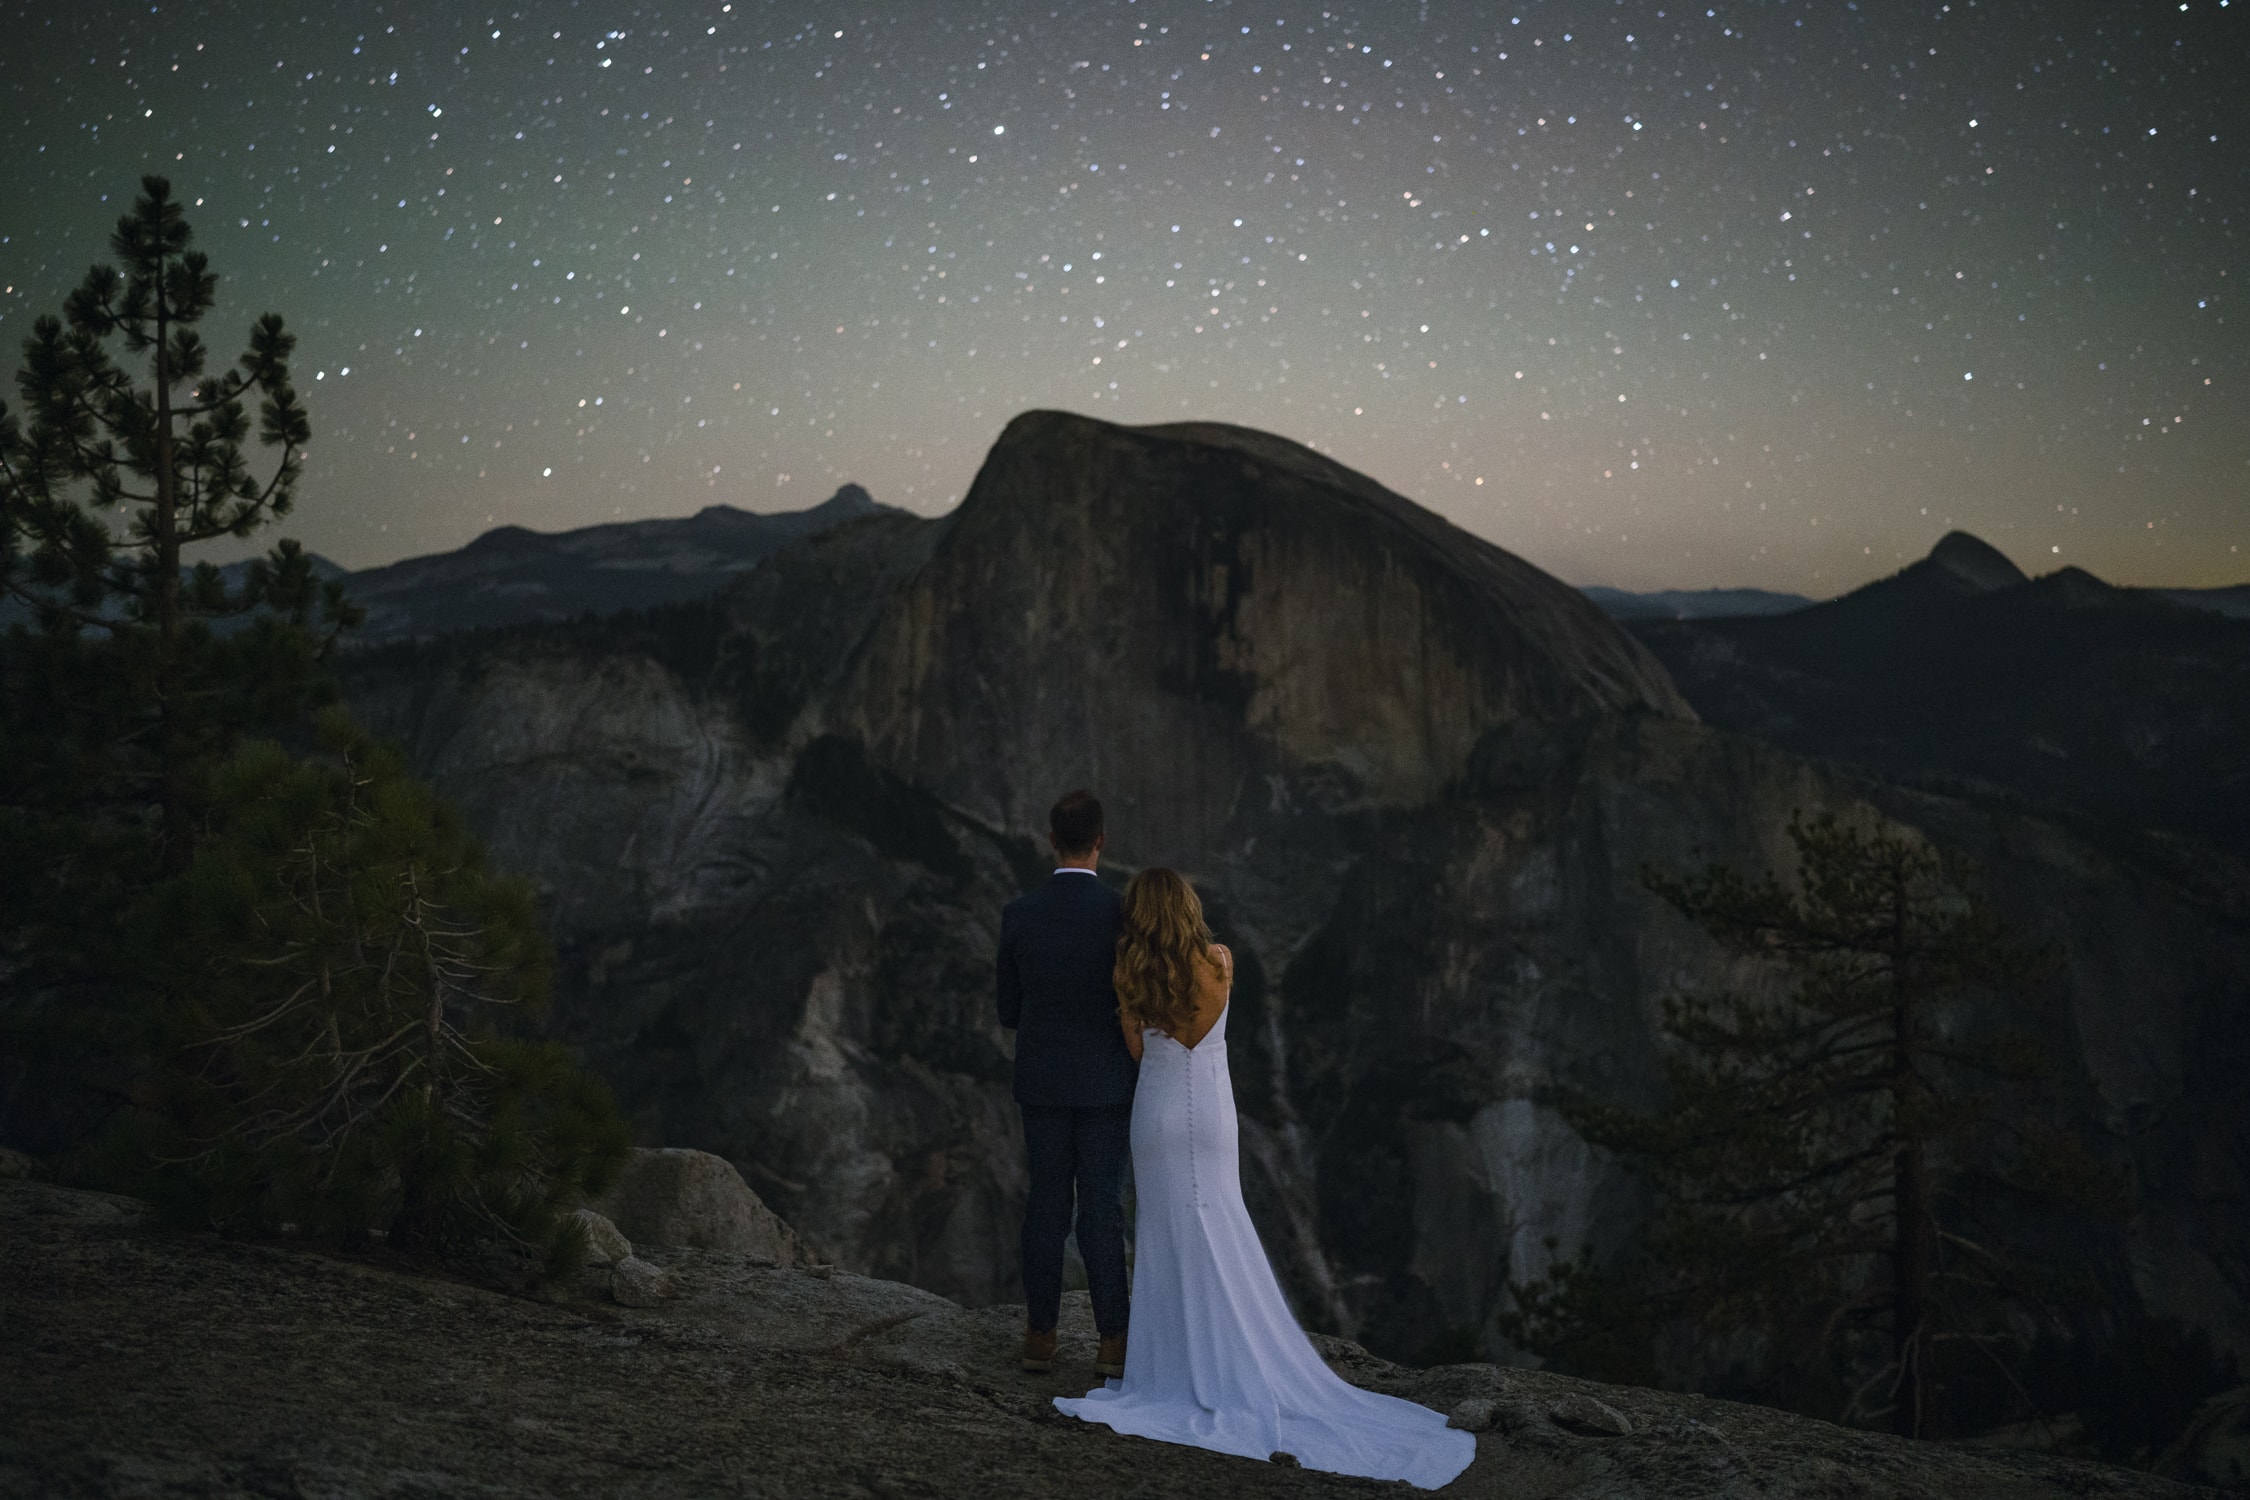 Bride and groom looking at Half Dome under the stars for their elopement in Yosemite.